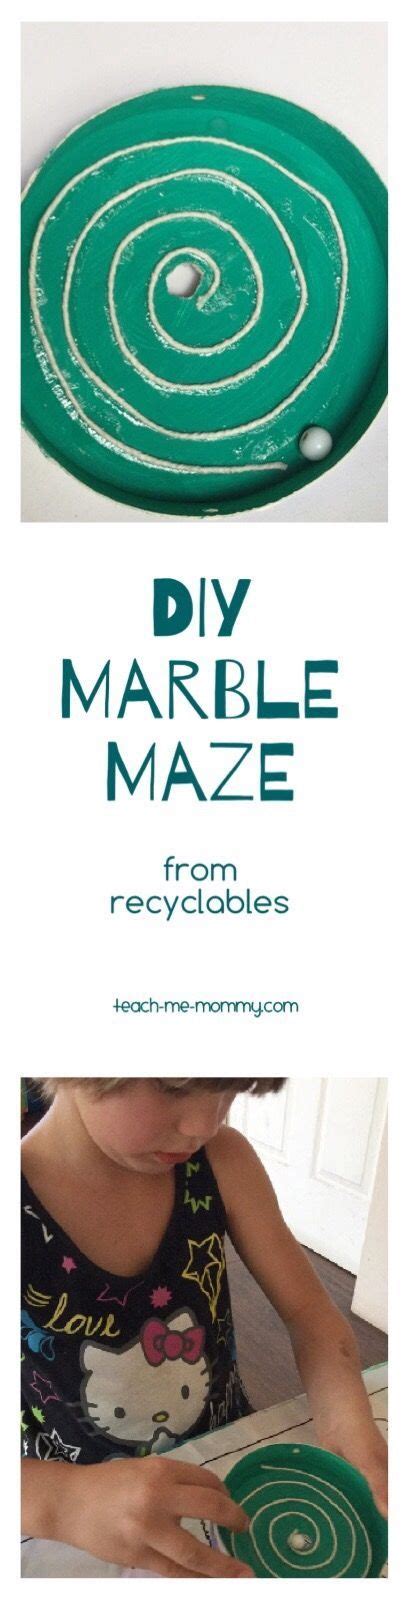 Diy Marble Maze From Recyclables Marble Maze Diy Marble Maze